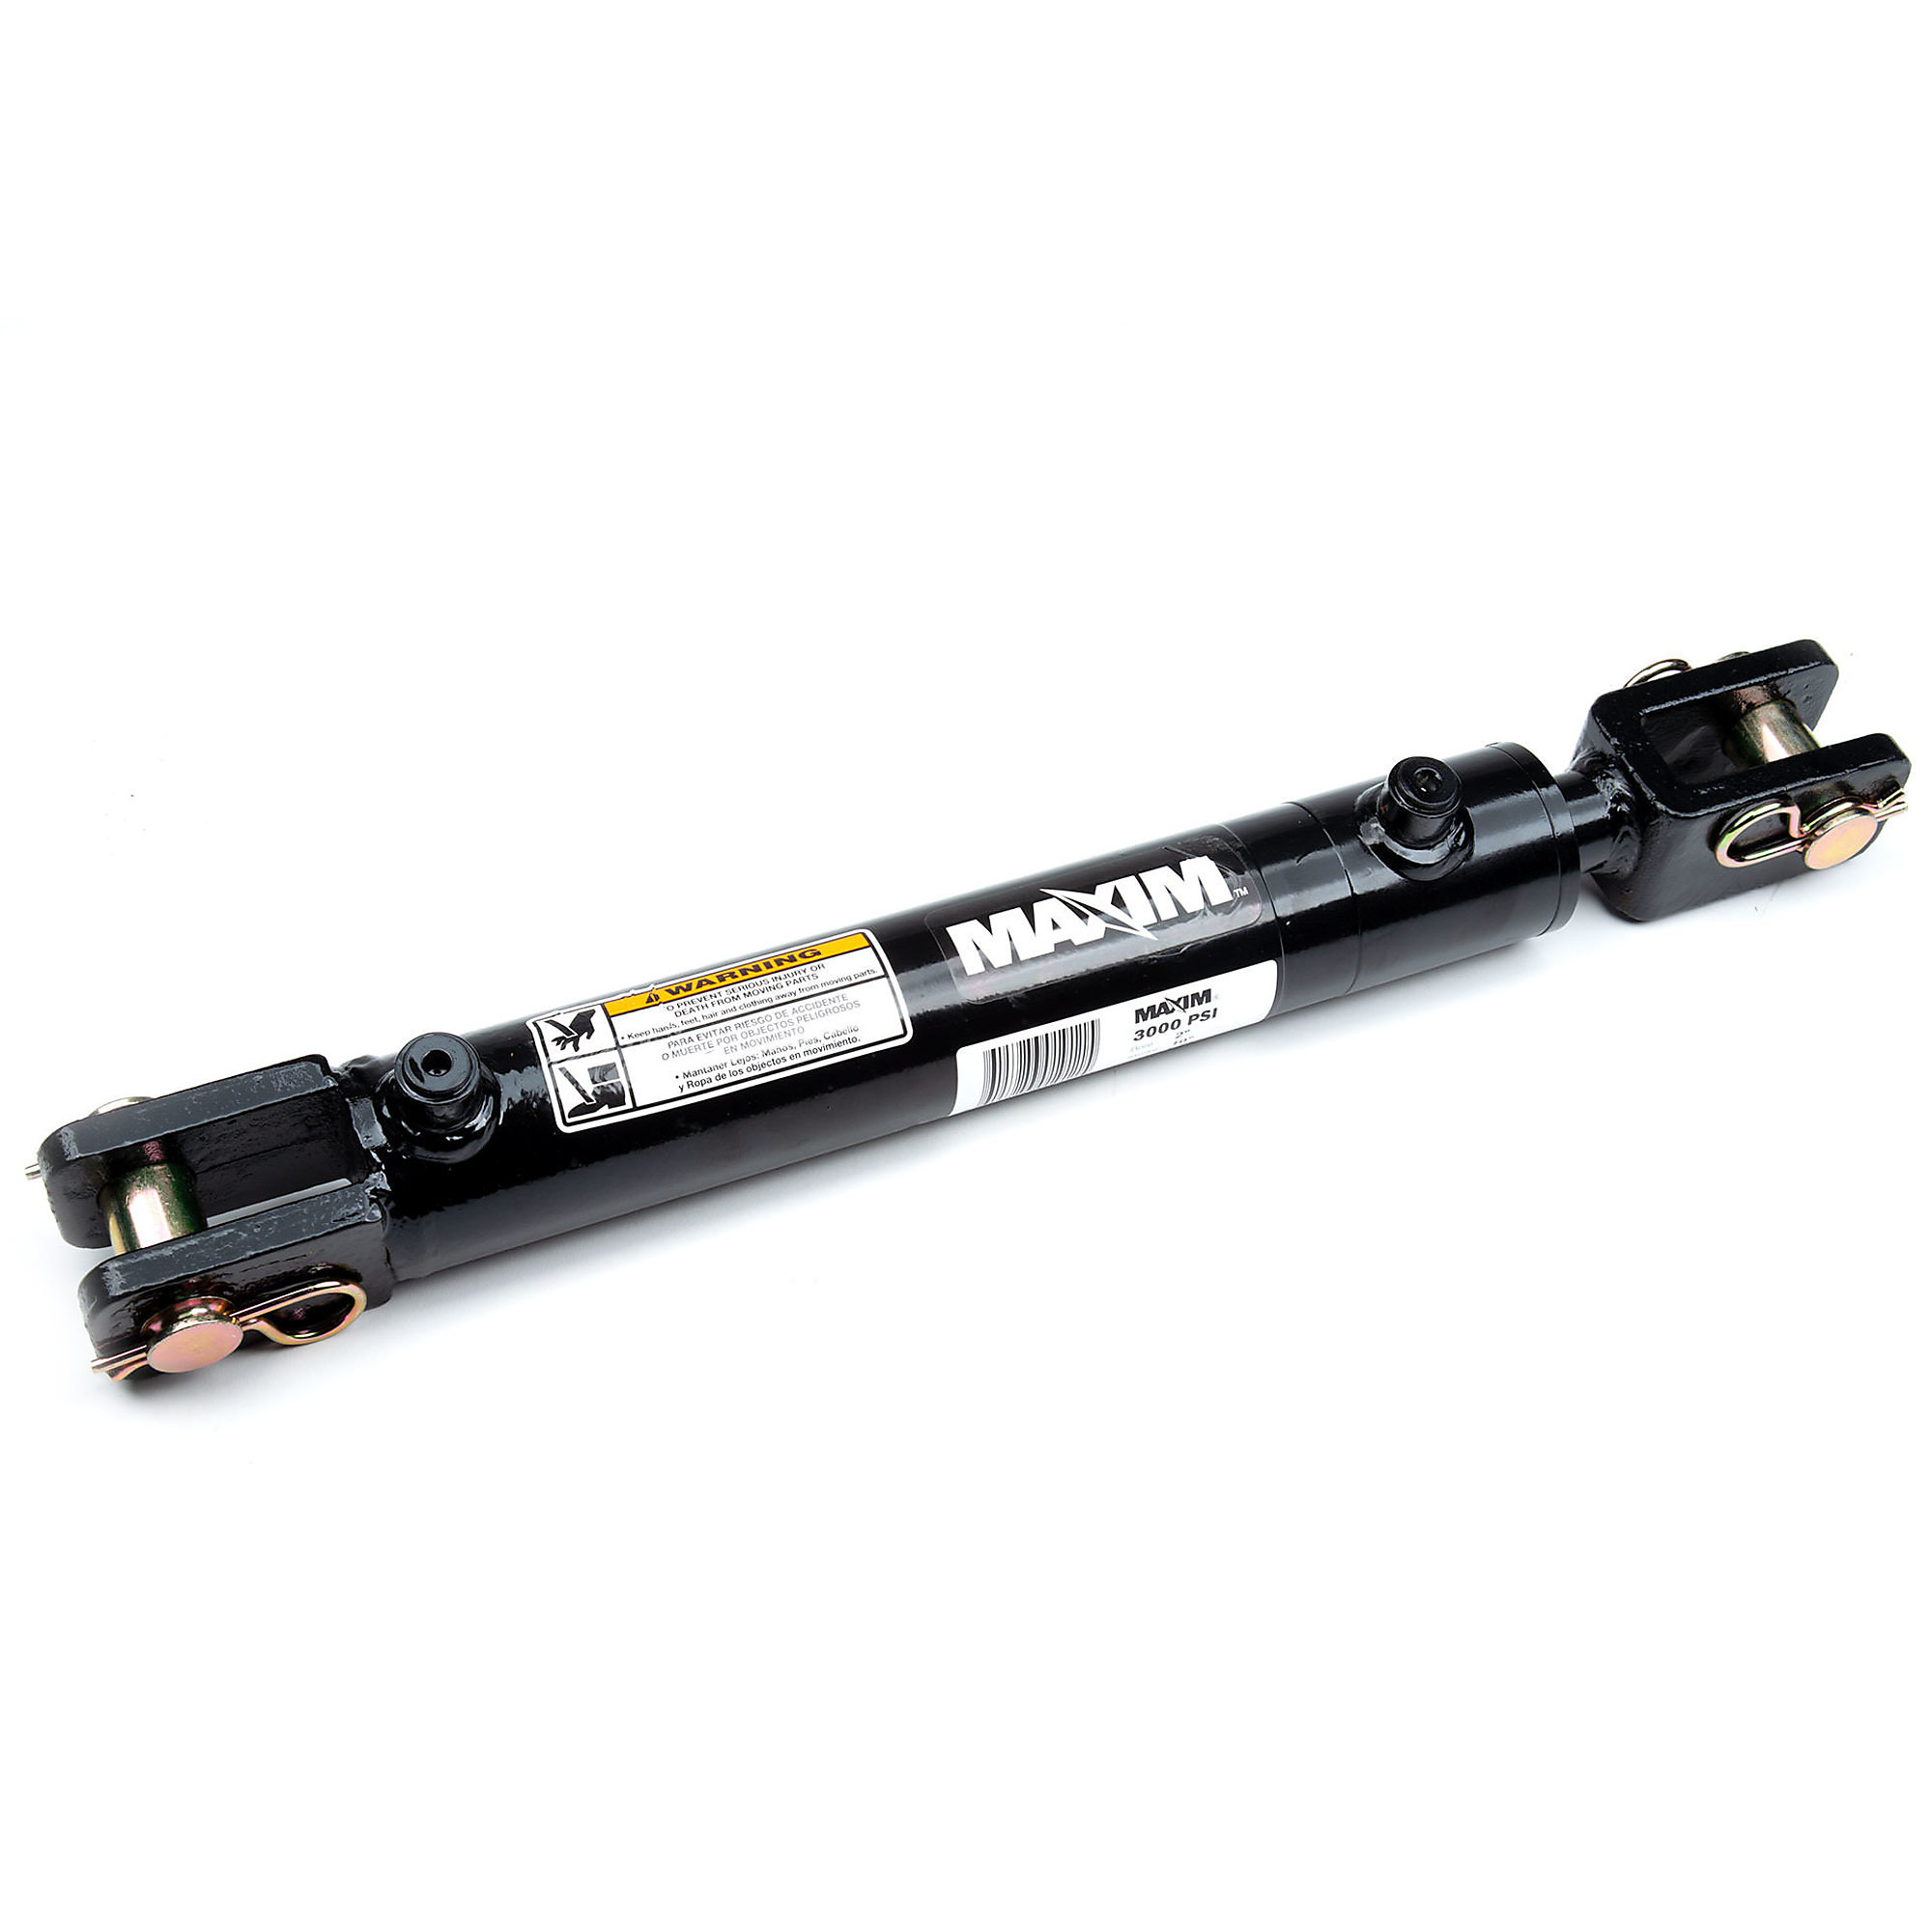 Maxim, WC Welded Cylinder, Max. PSI 3000, Bore Diameter 3 in, Stroke Length 18 in, Model 288434